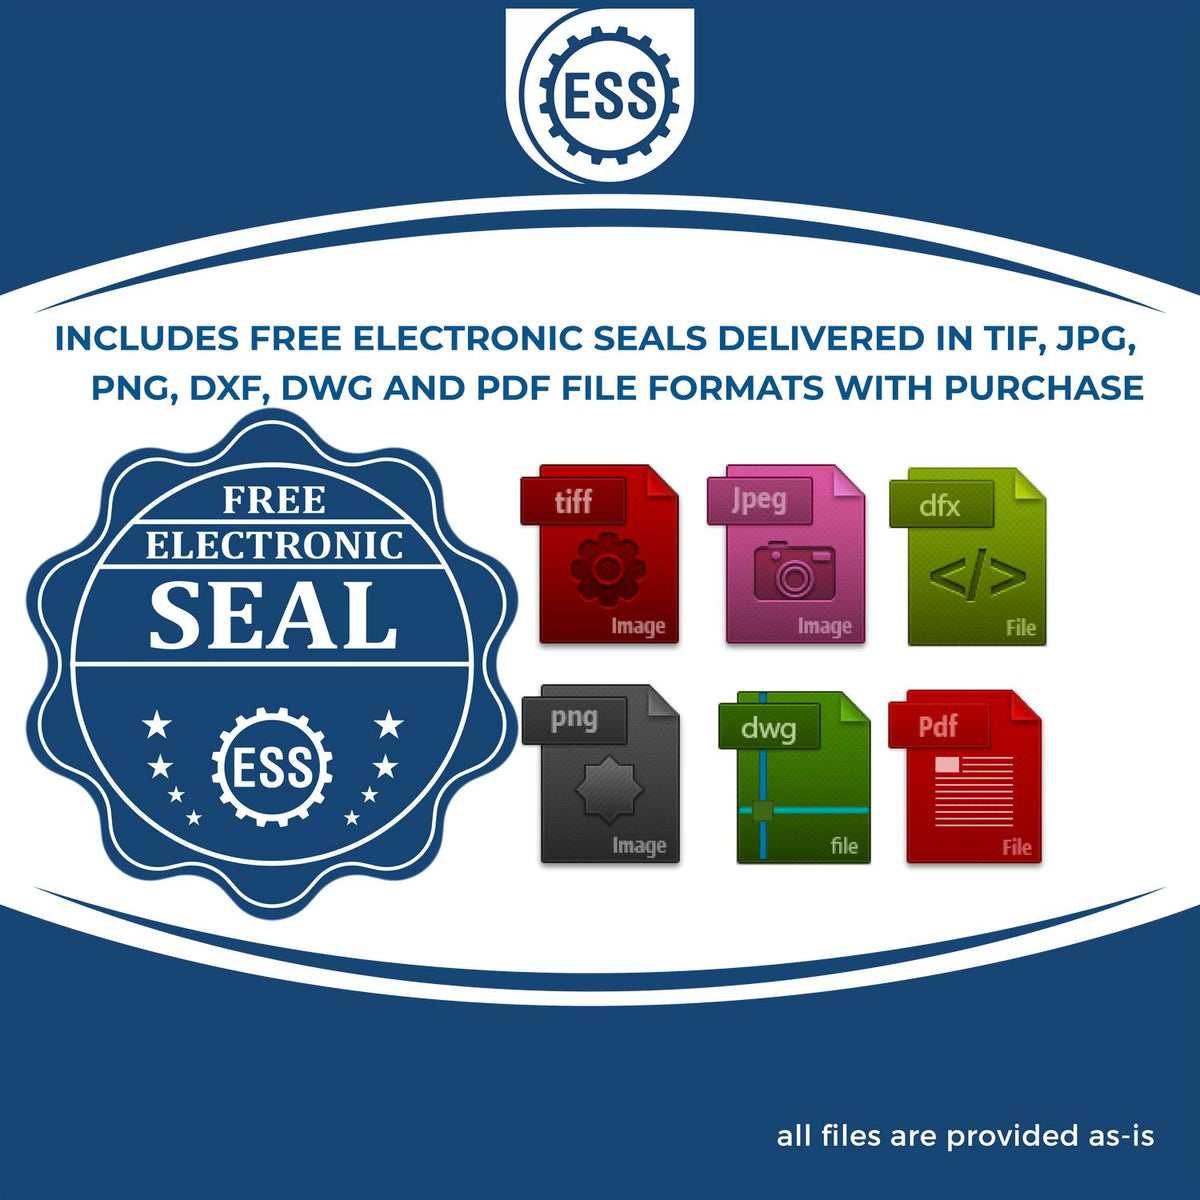 An infographic for the free electronic seal for the Heavy Duty Cast Iron Florida Architect Embosser illustrating the different file type icons such as DXF, DWG, TIF, JPG and PNG.